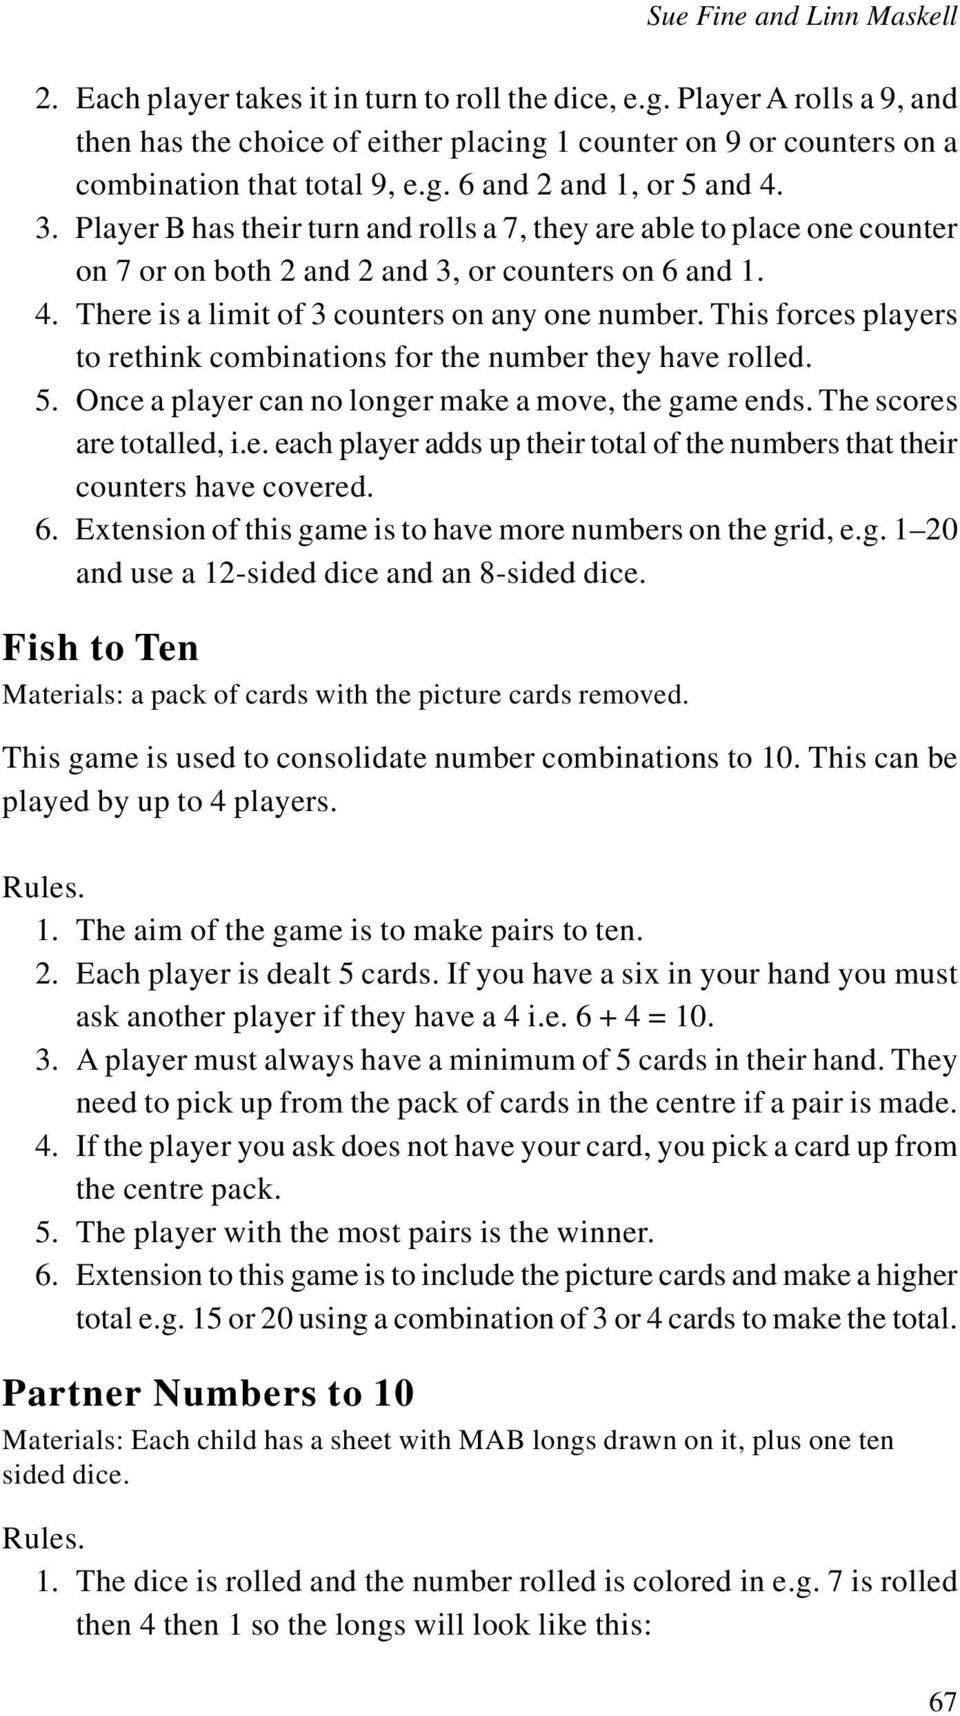 Player B has their turn and rolls a 7, they are able to place one counter on 7 or on both 2 and 2 and 3, or counters on 6 and 1. 4. There is a limit of 3 counters on any one number.